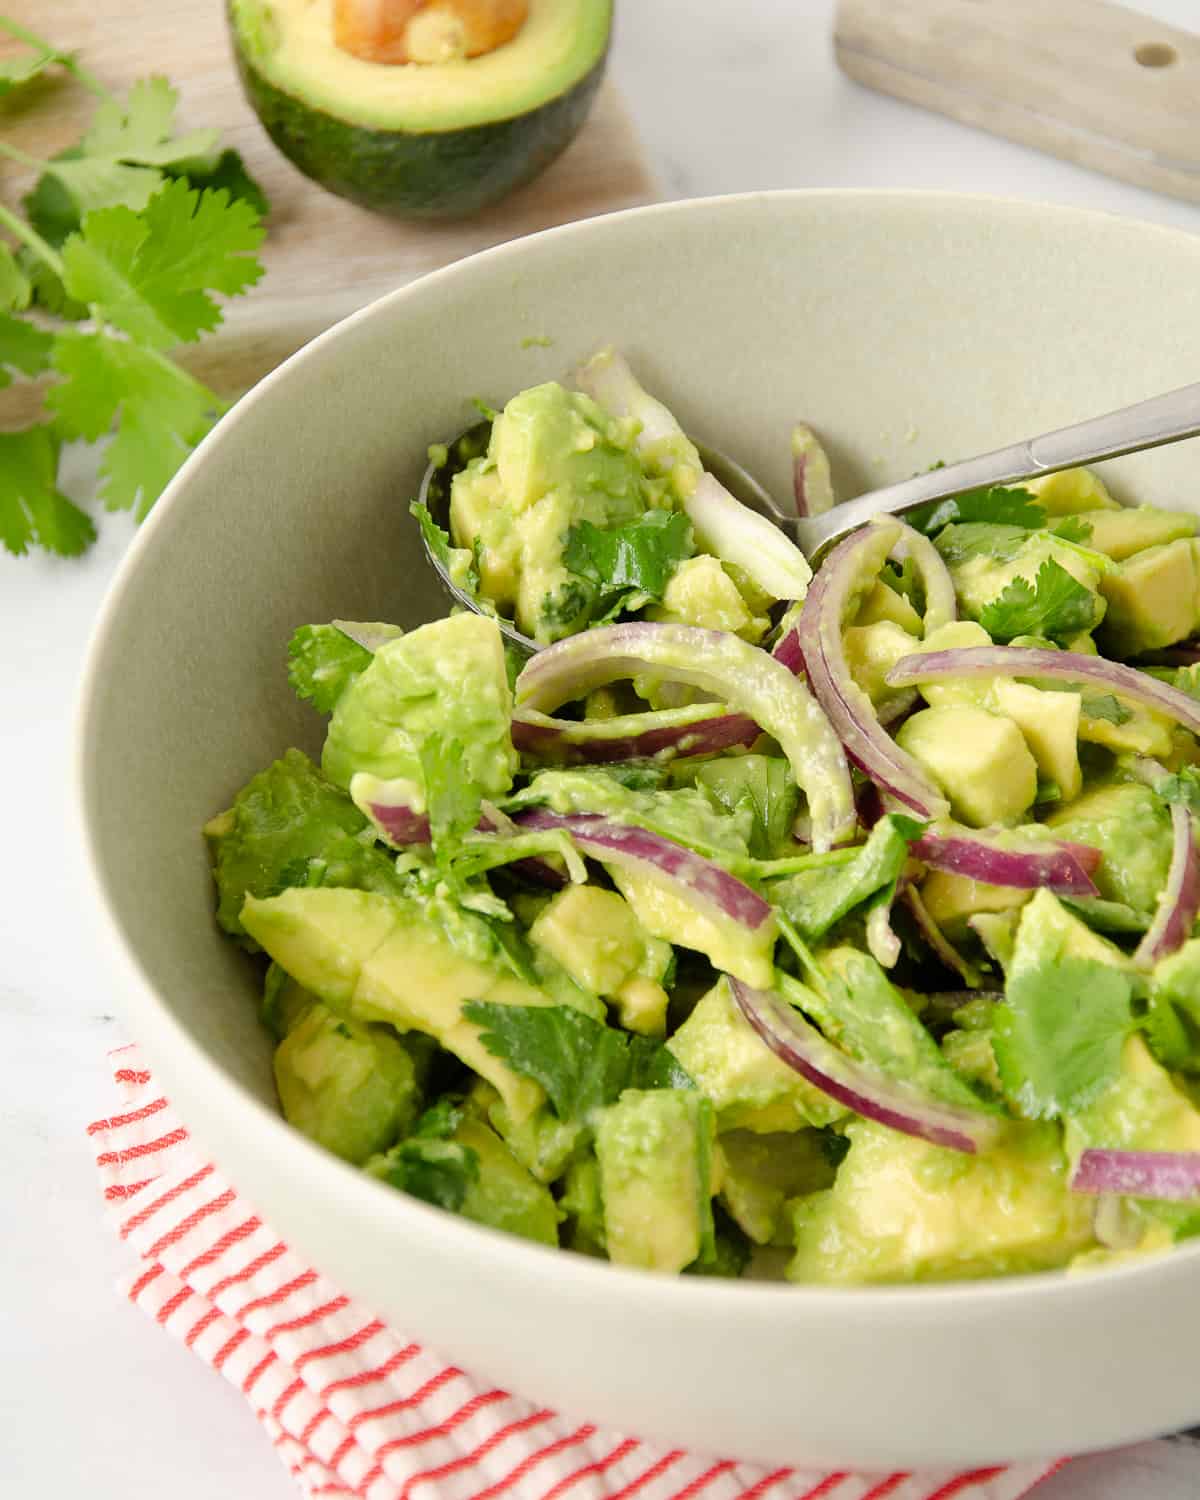 A close up view of an avocado salad in a large bowl.